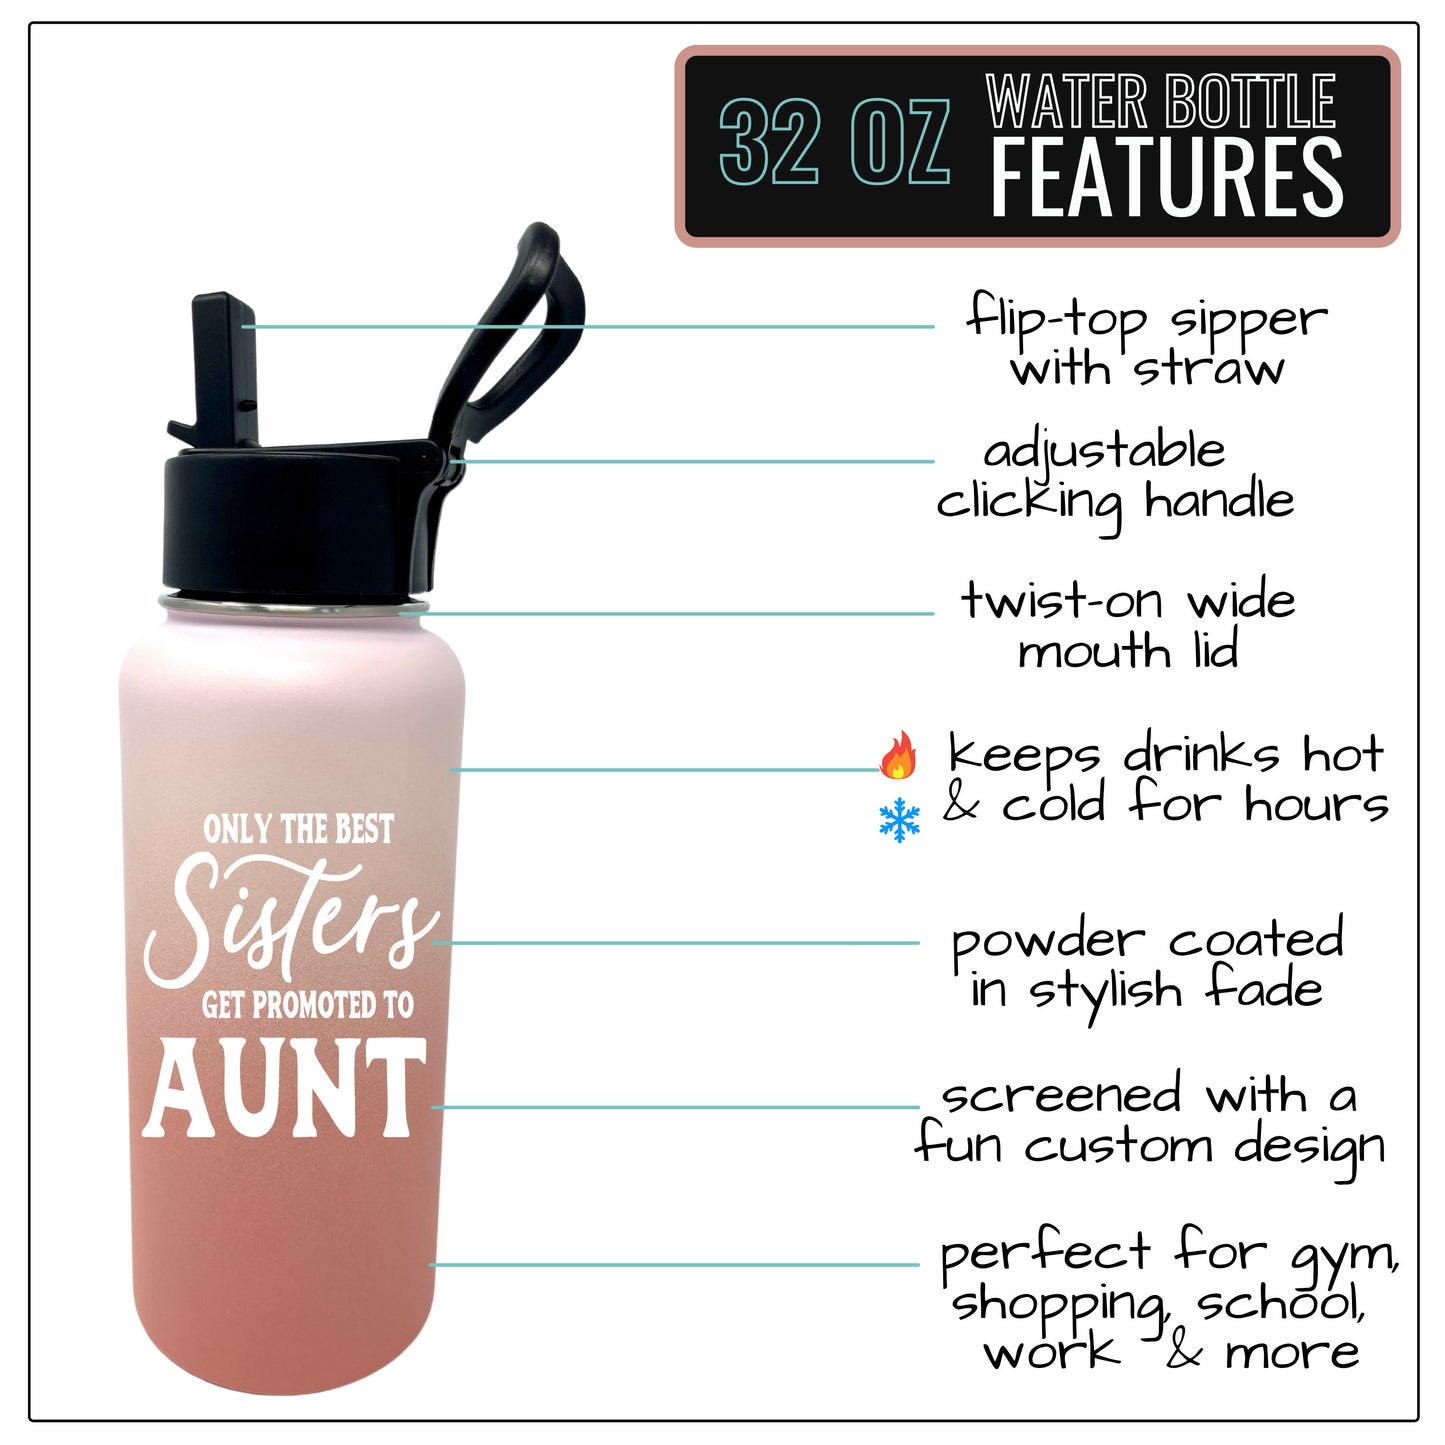 Only the Best Sisters Get Promoted to Aunt 32 oz  Rose Gold Water Bottle for Aunts